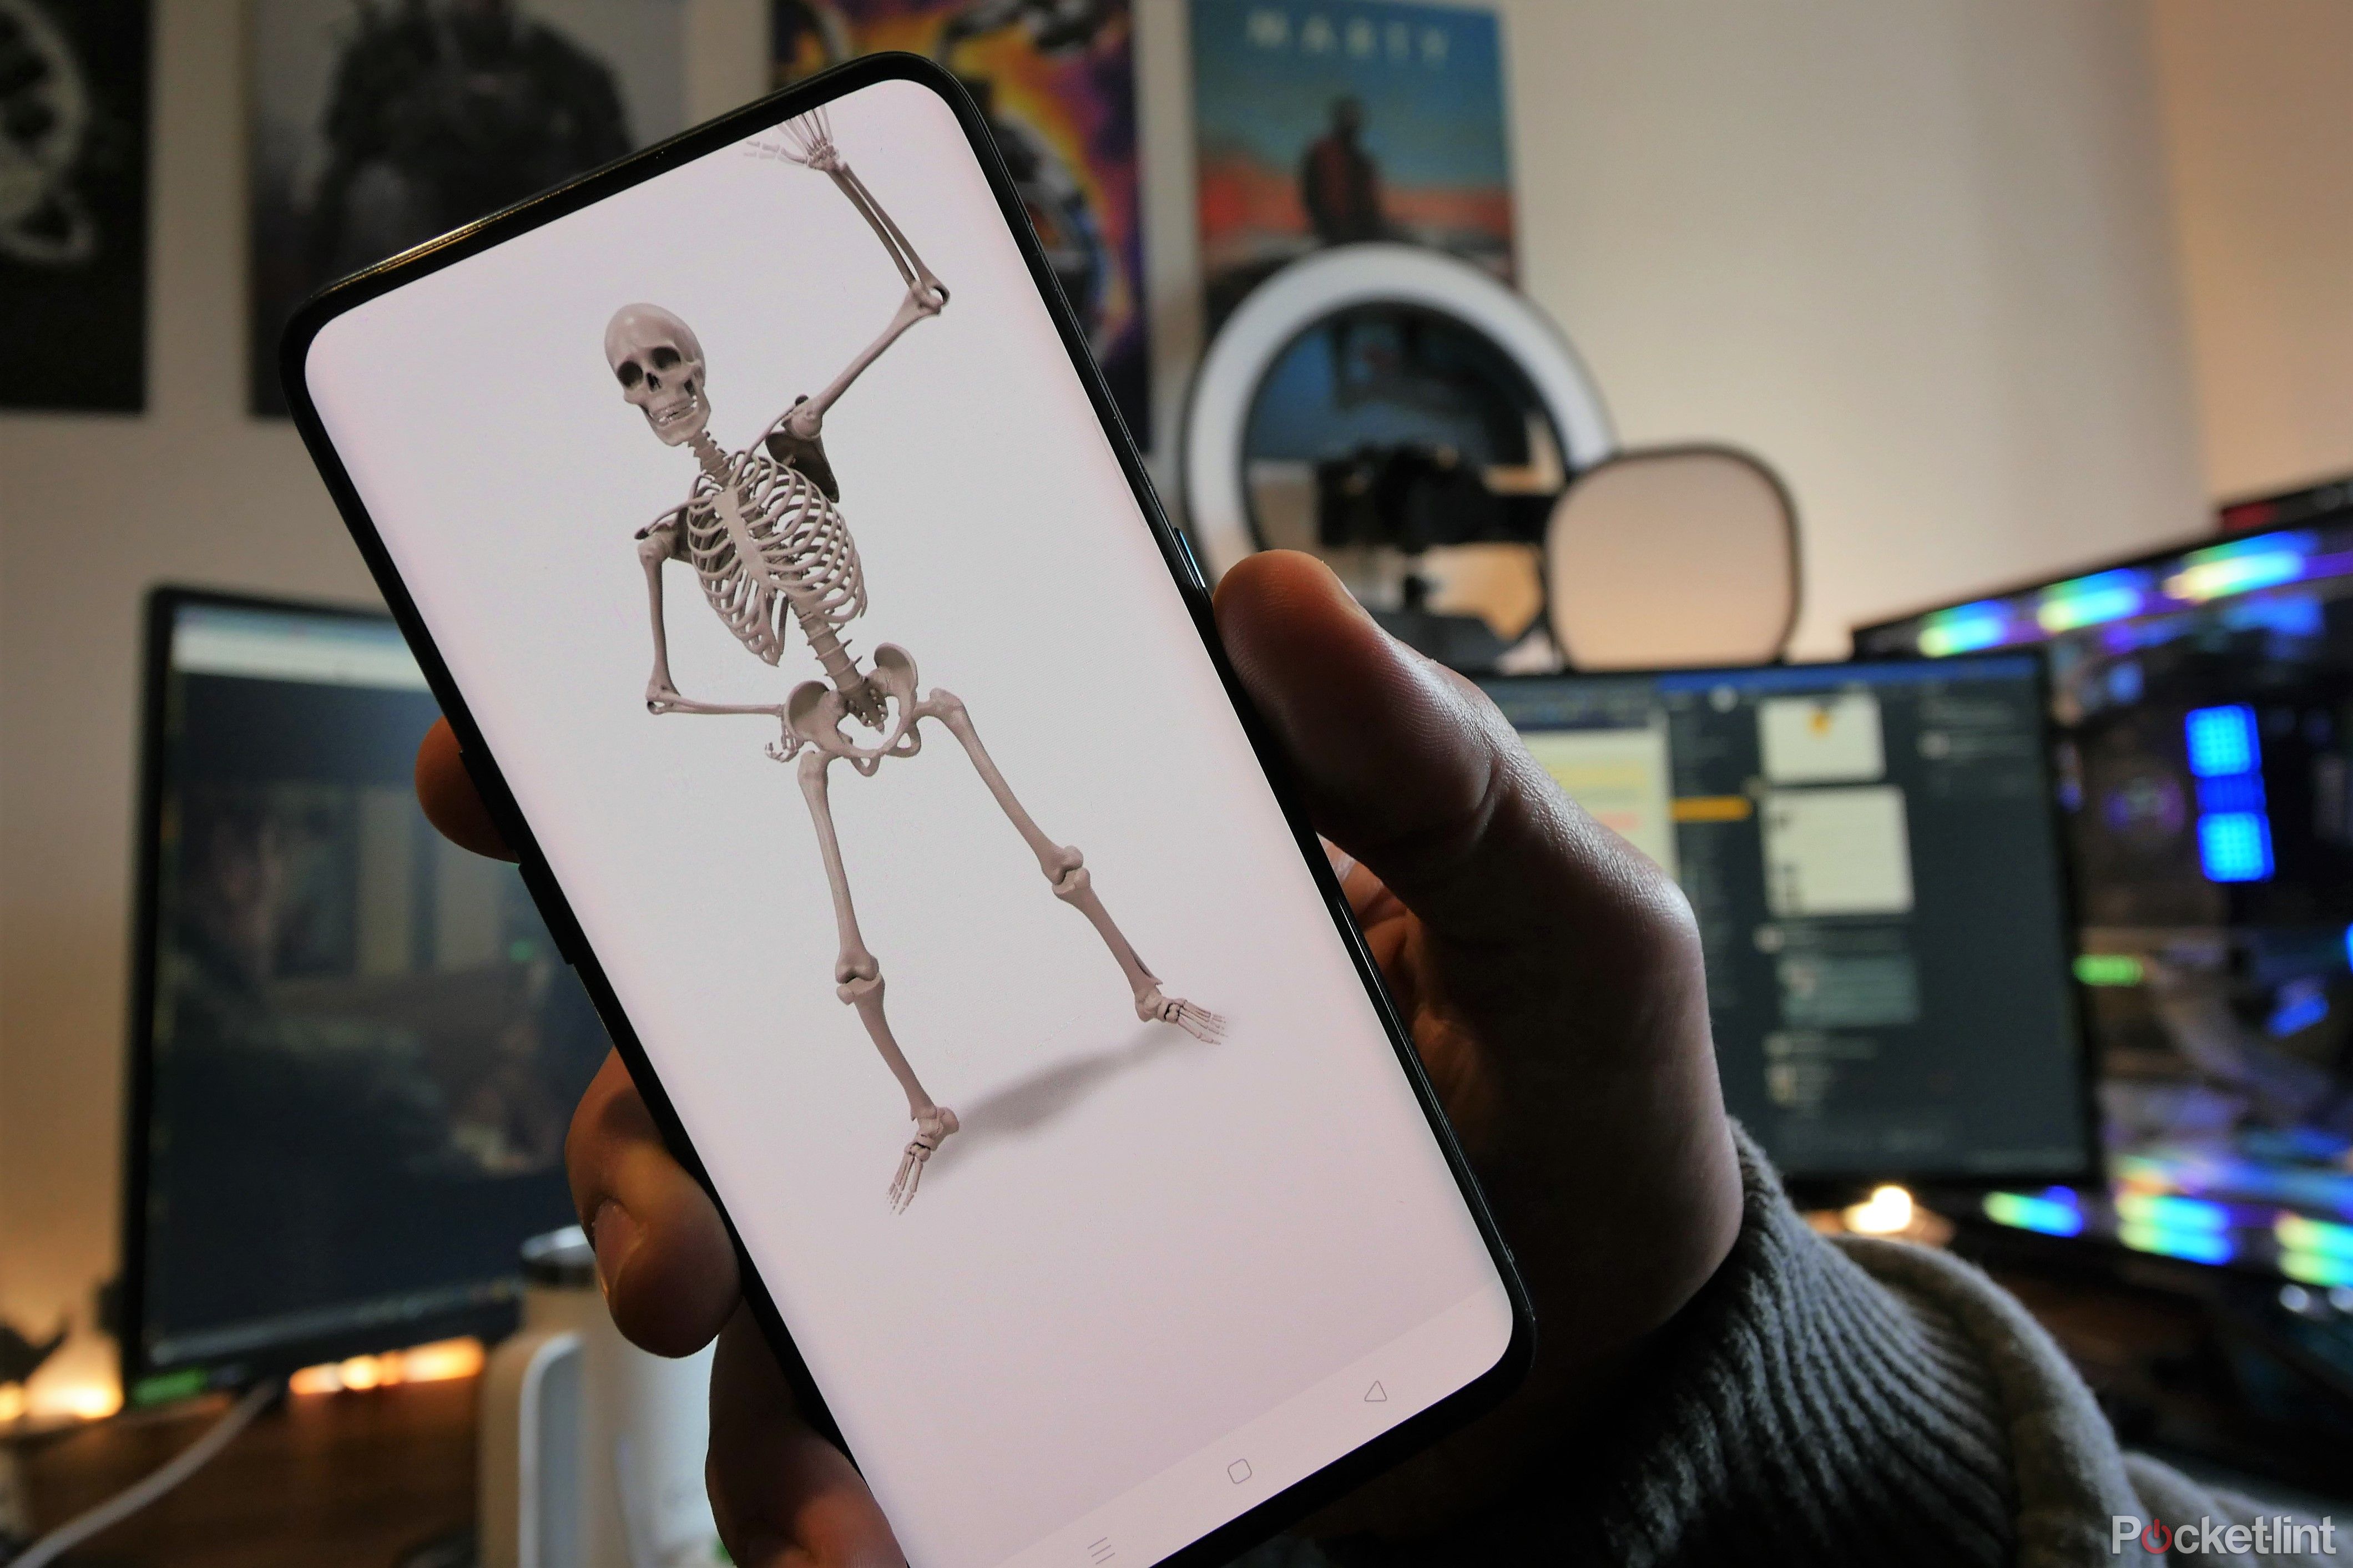 Google has some fun treats for Halloween including augmented reality skeletons and ghosts photo 1